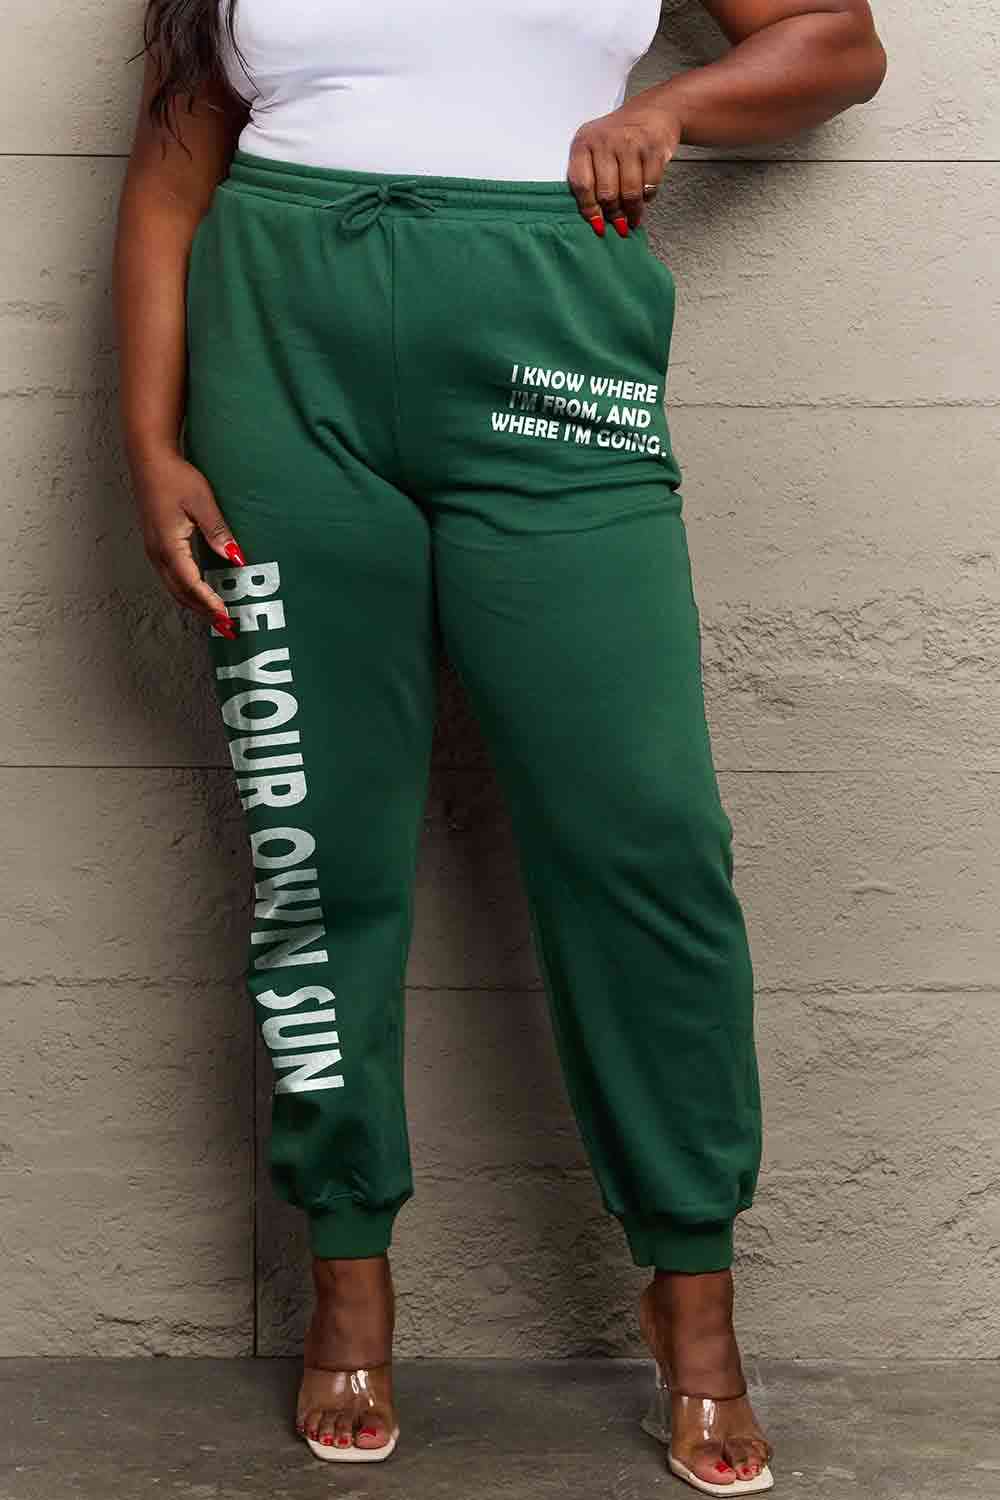 Simply Love Full Size BE YOUR OWN SUN Graphic Sweatpants - GemThreads Boutique